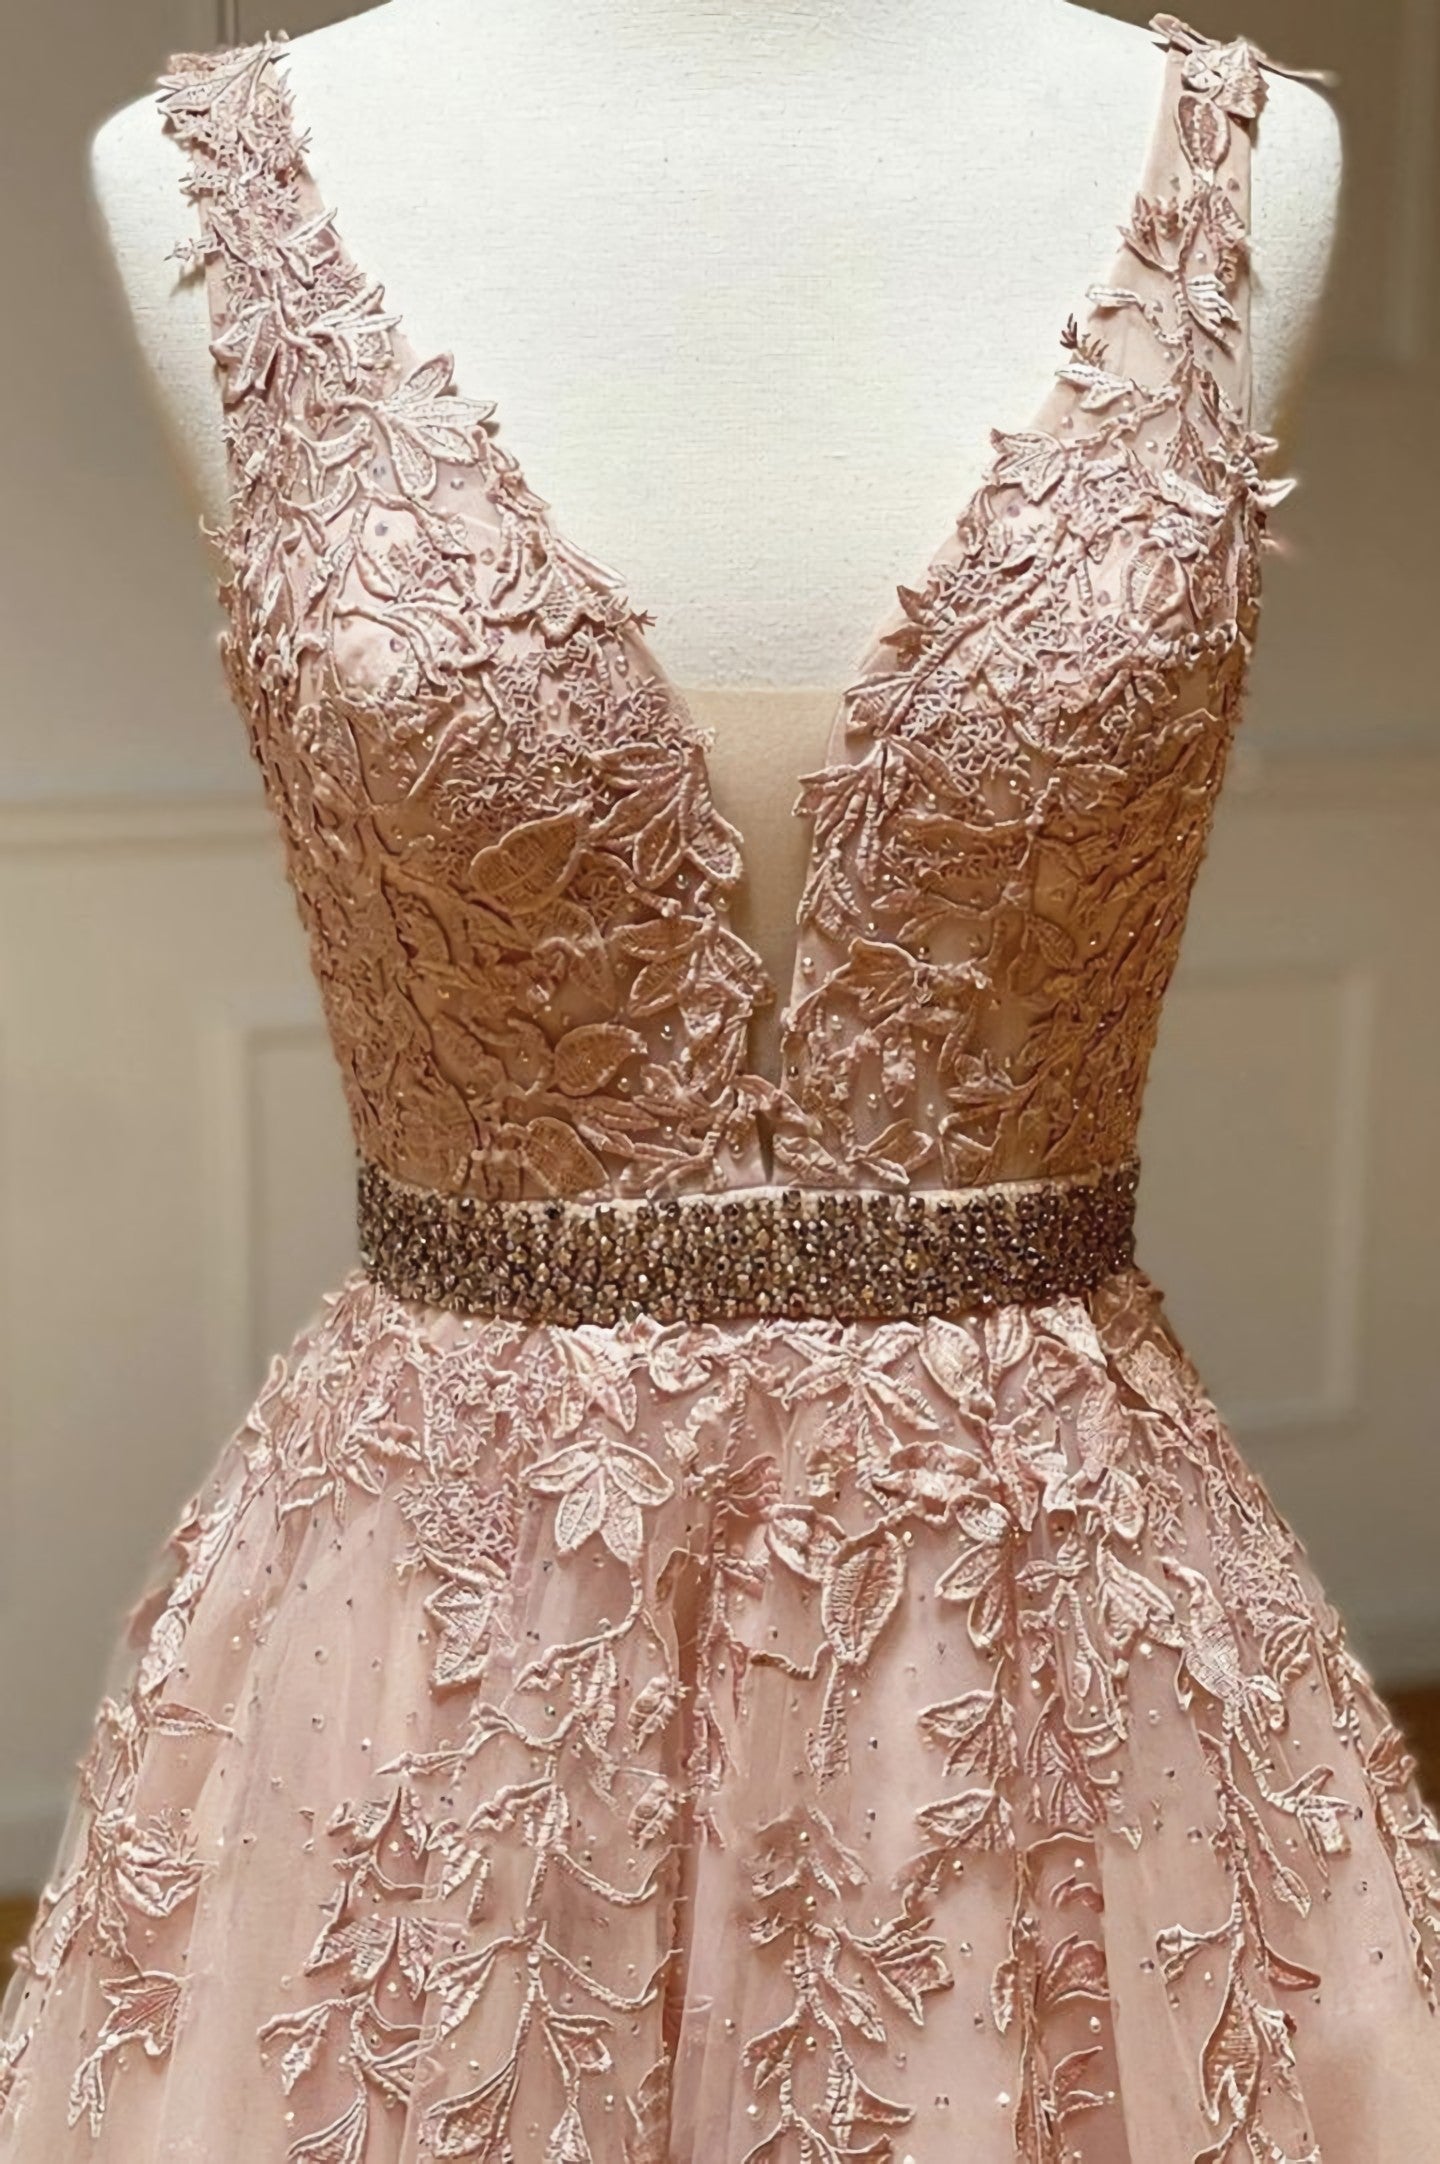 Prom Dresses With Shorts Underneath, Pink V Neck Lace Long A Line Prom Dress, Evening Dress